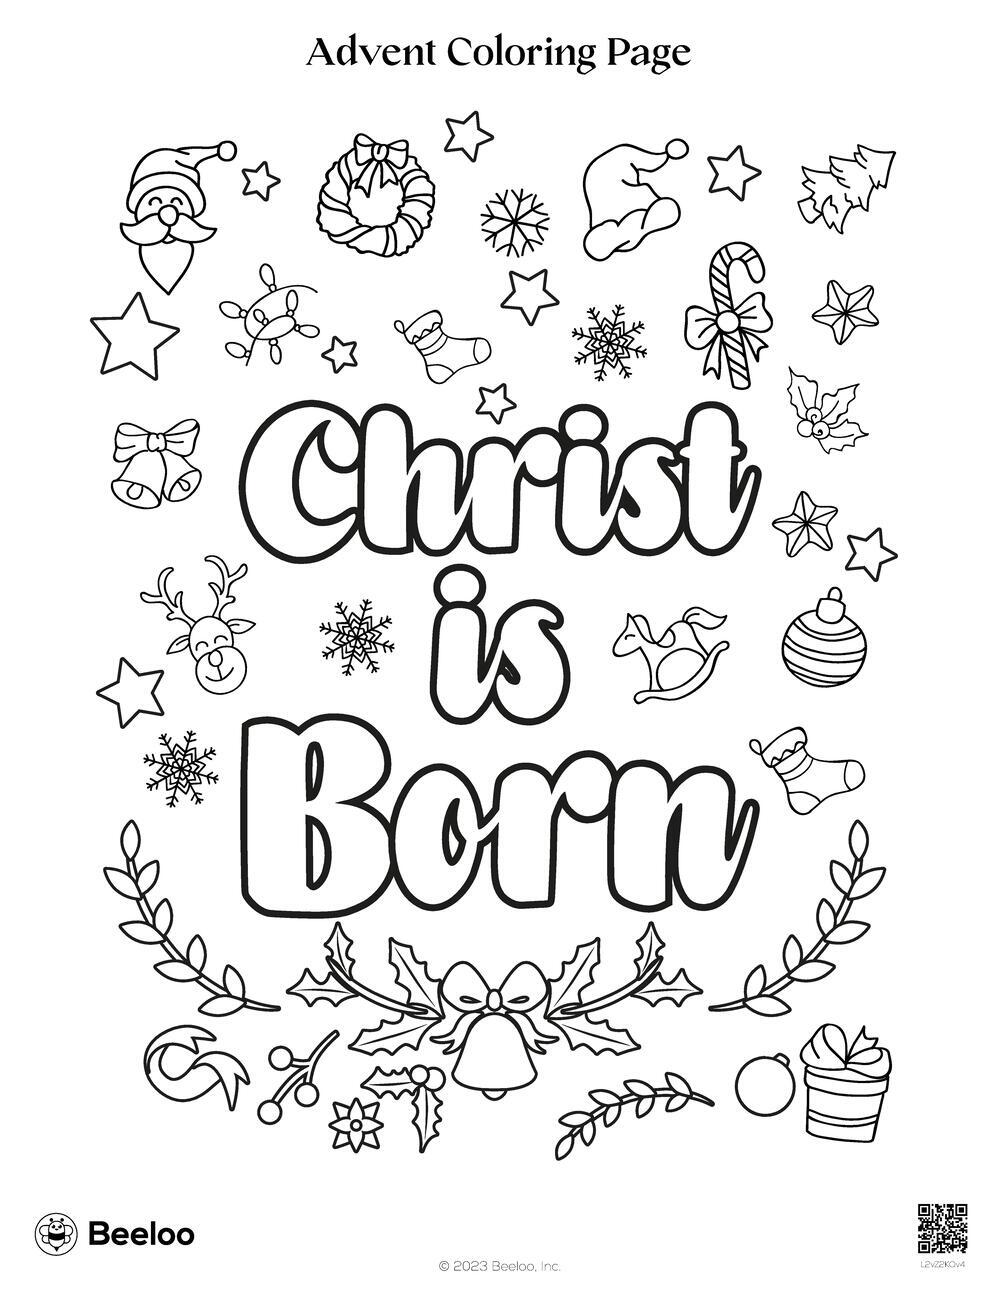 Advent coloring page â printable crafts and activities for kids